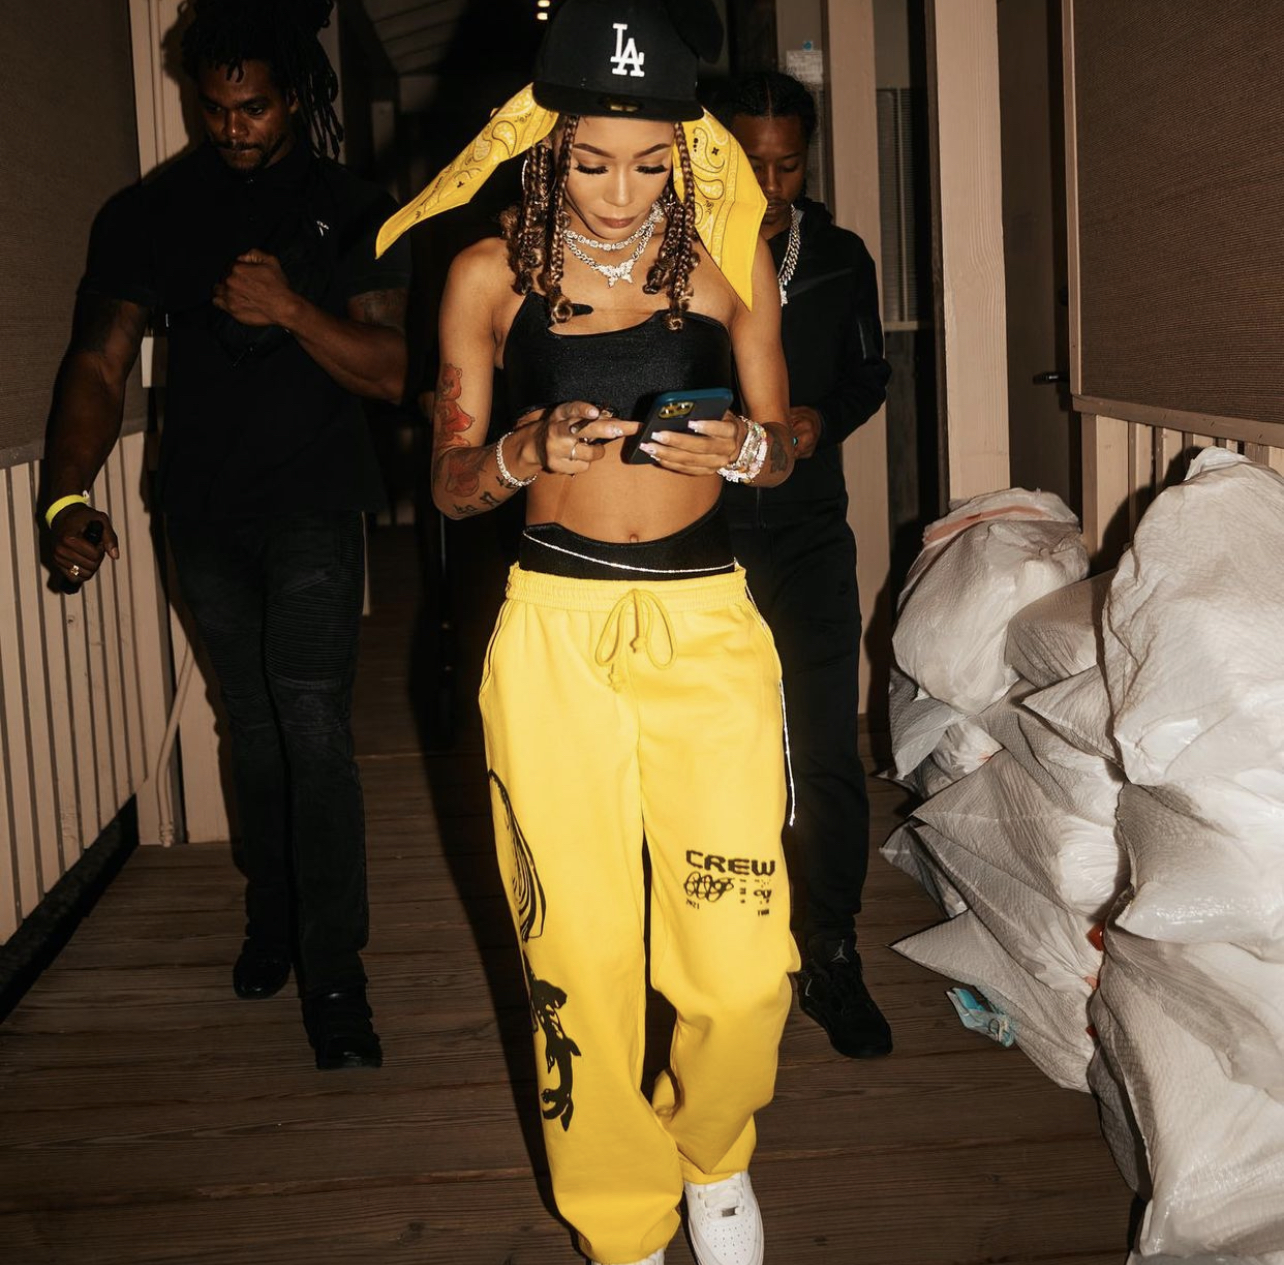 https://fashionbombdaily.com/wp-content/uploads/2021/09/Coi-Leray-Performs-in-Yellow-and-Black-Look-Featuring-Fashion-Nova-Black-Cutout-Bodysuit.jpg